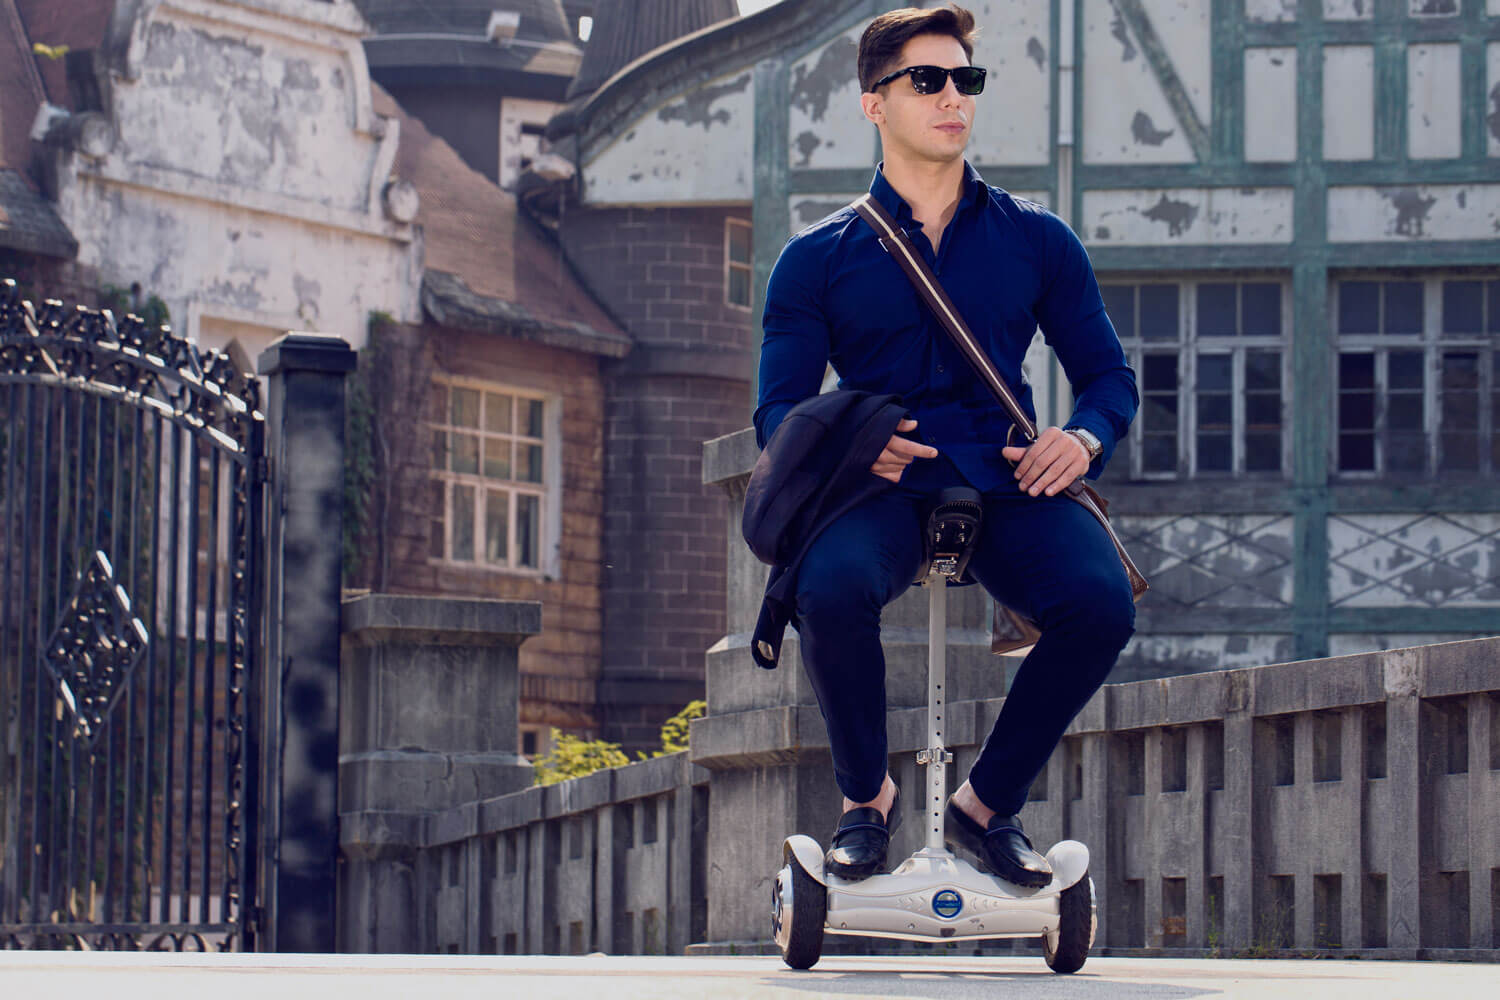 saddle-equipped self-balancing scooter